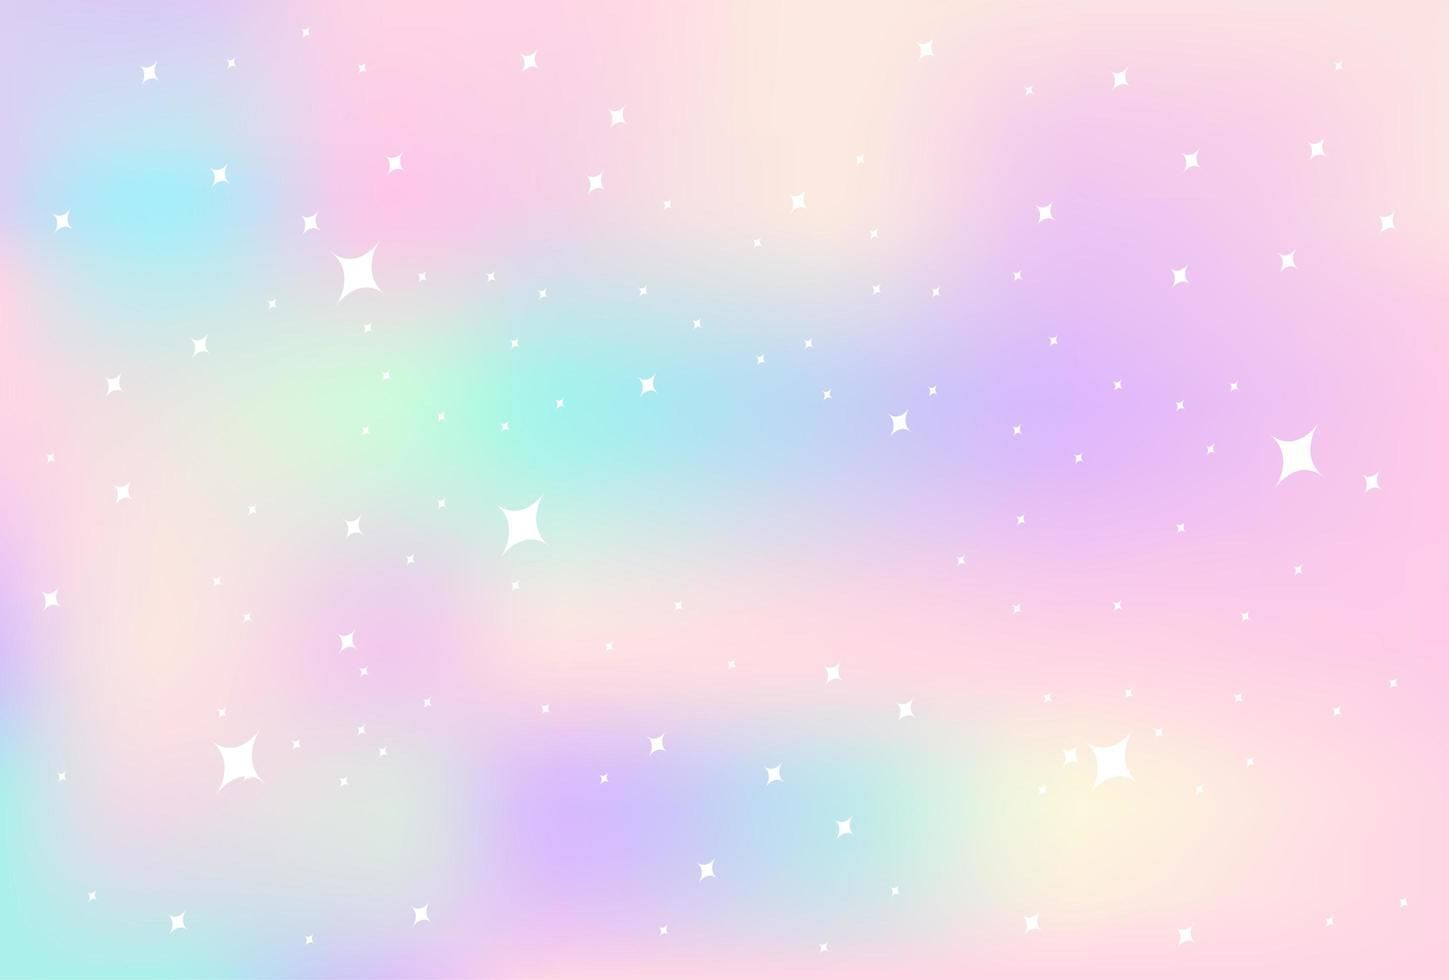 A pastel colored background with white stars - Pastel rainbow